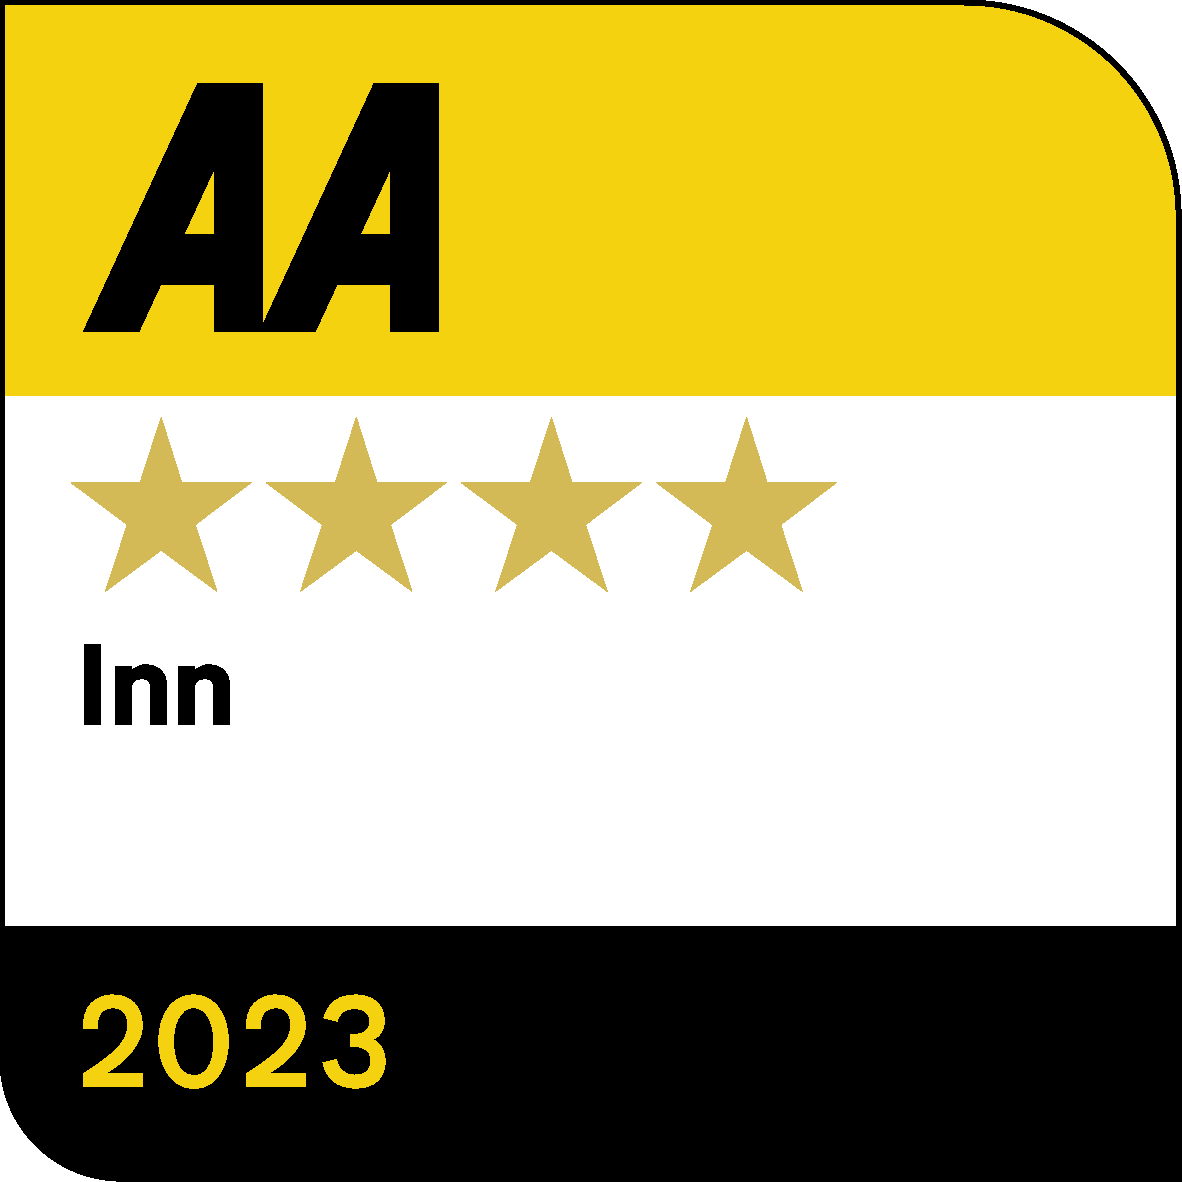 ⭐️ Great News ⭐️

The Red Lion has retained its #AAAwards for 2023! You can rest assured it is still a 4 star inn, with a rosette for culinary excellence, serving #AwardWinning breakfasts 😁.